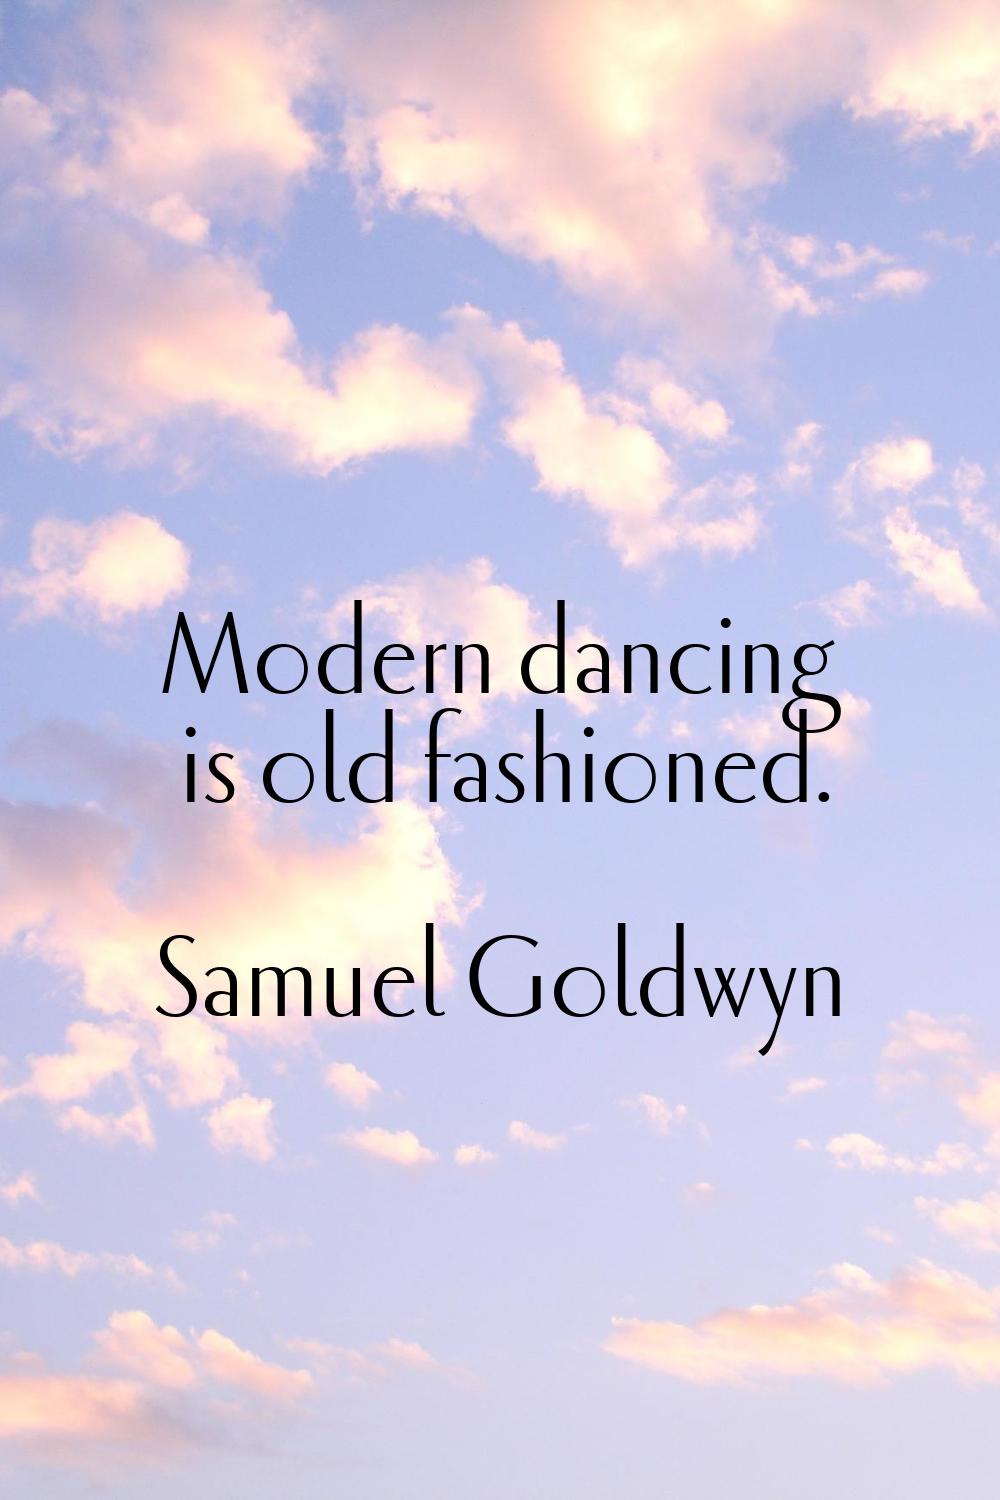 Modern dancing is old fashioned.